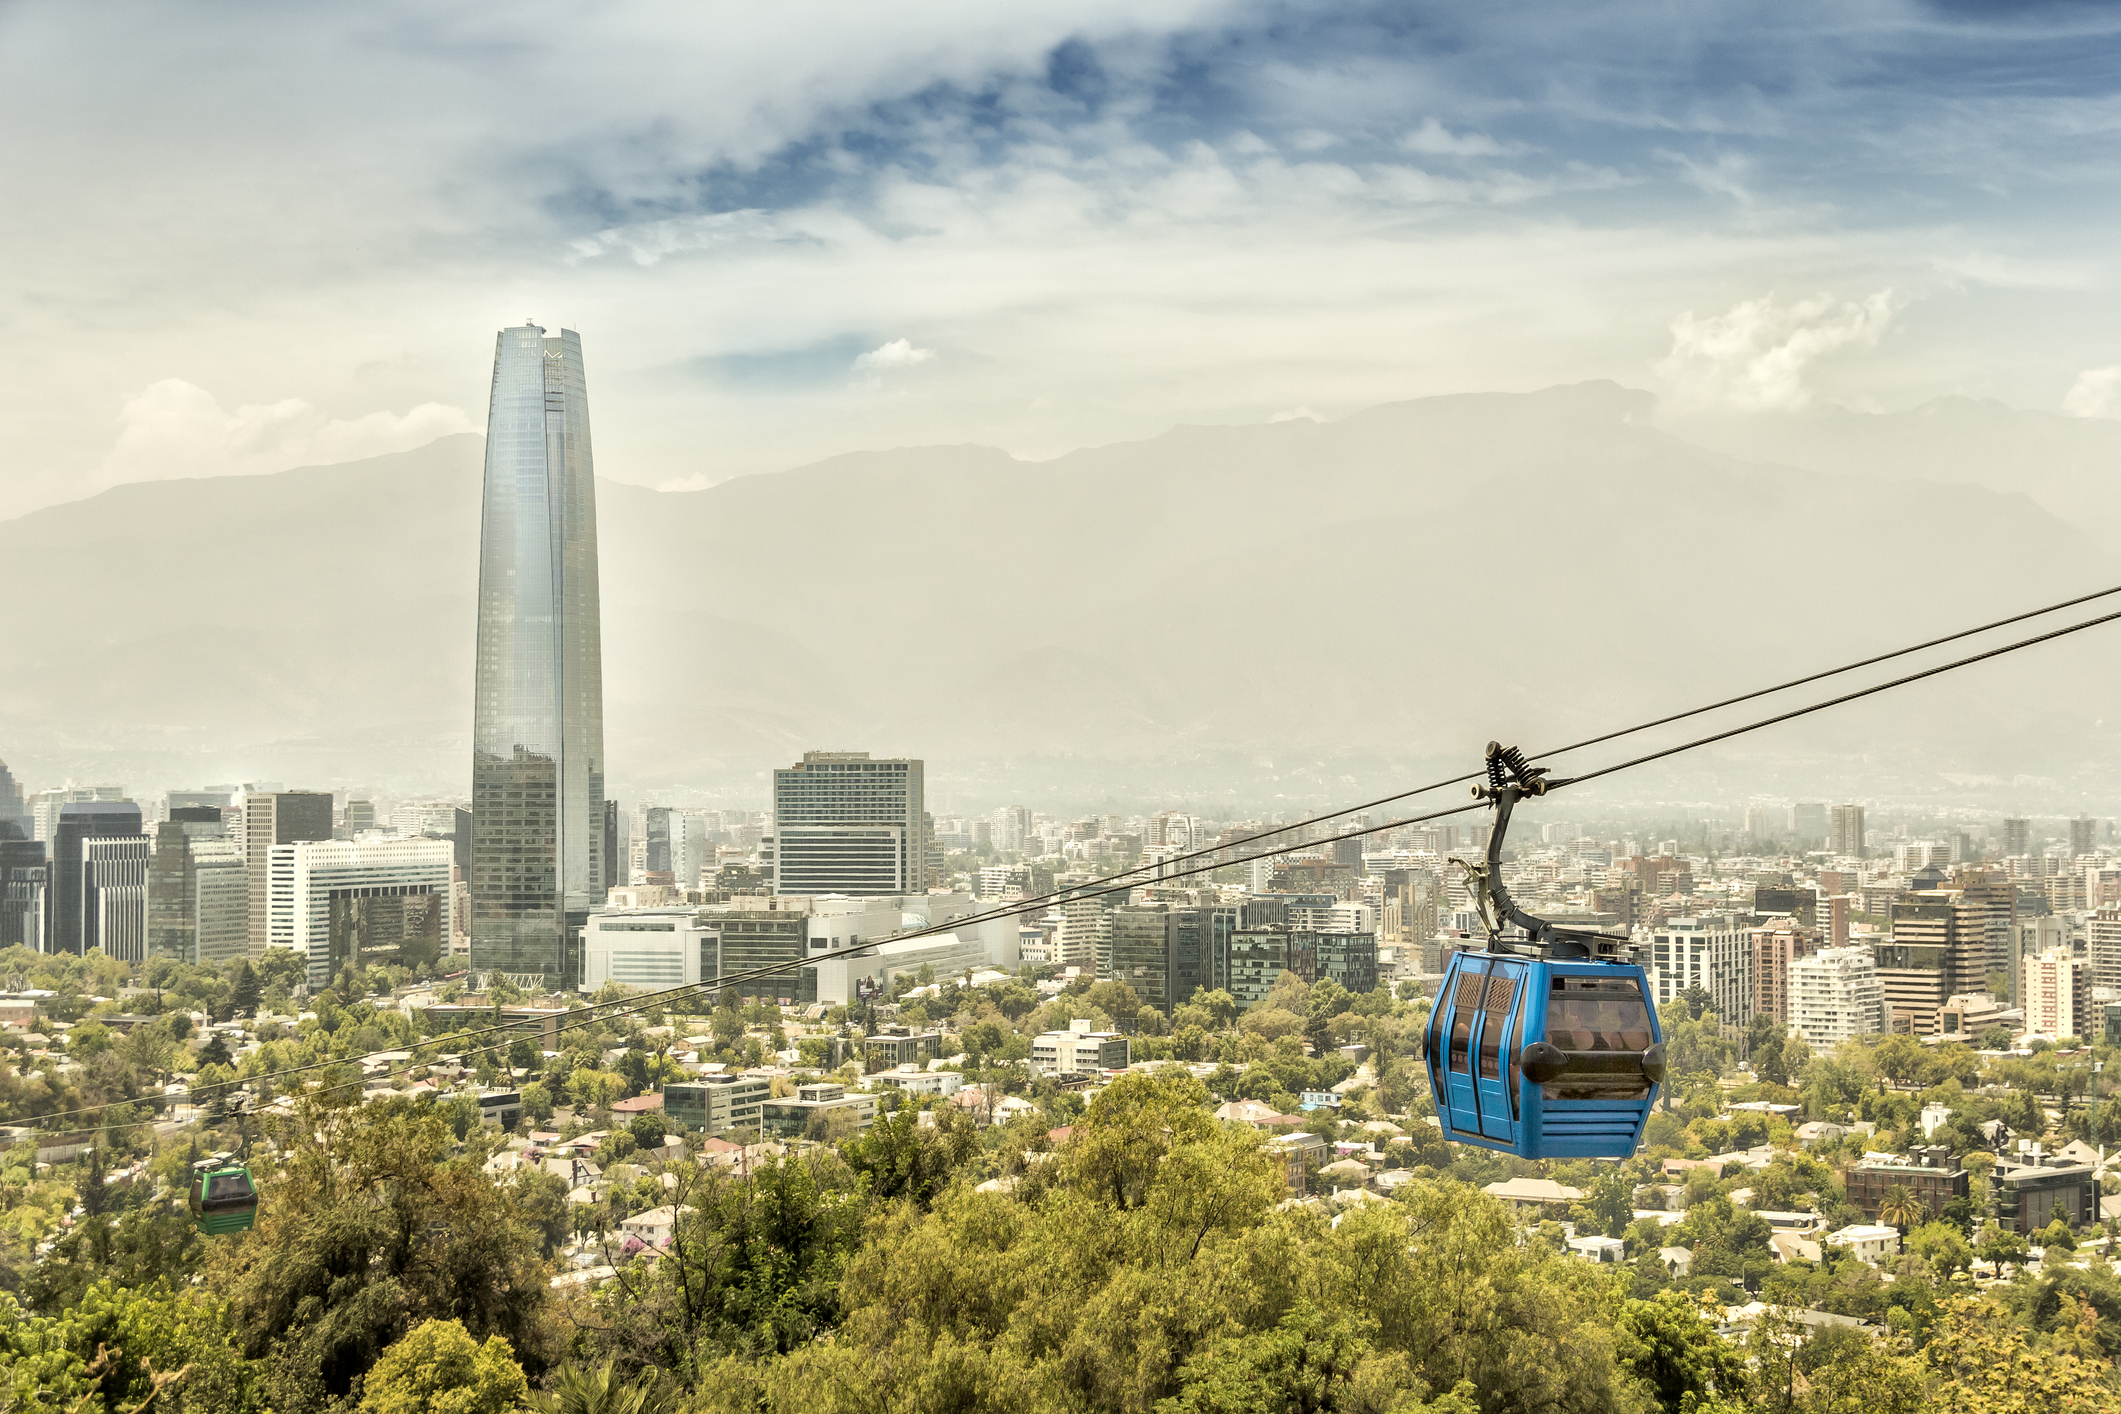 View of the city of Santiago de Chile, from the San Cristobal hill.